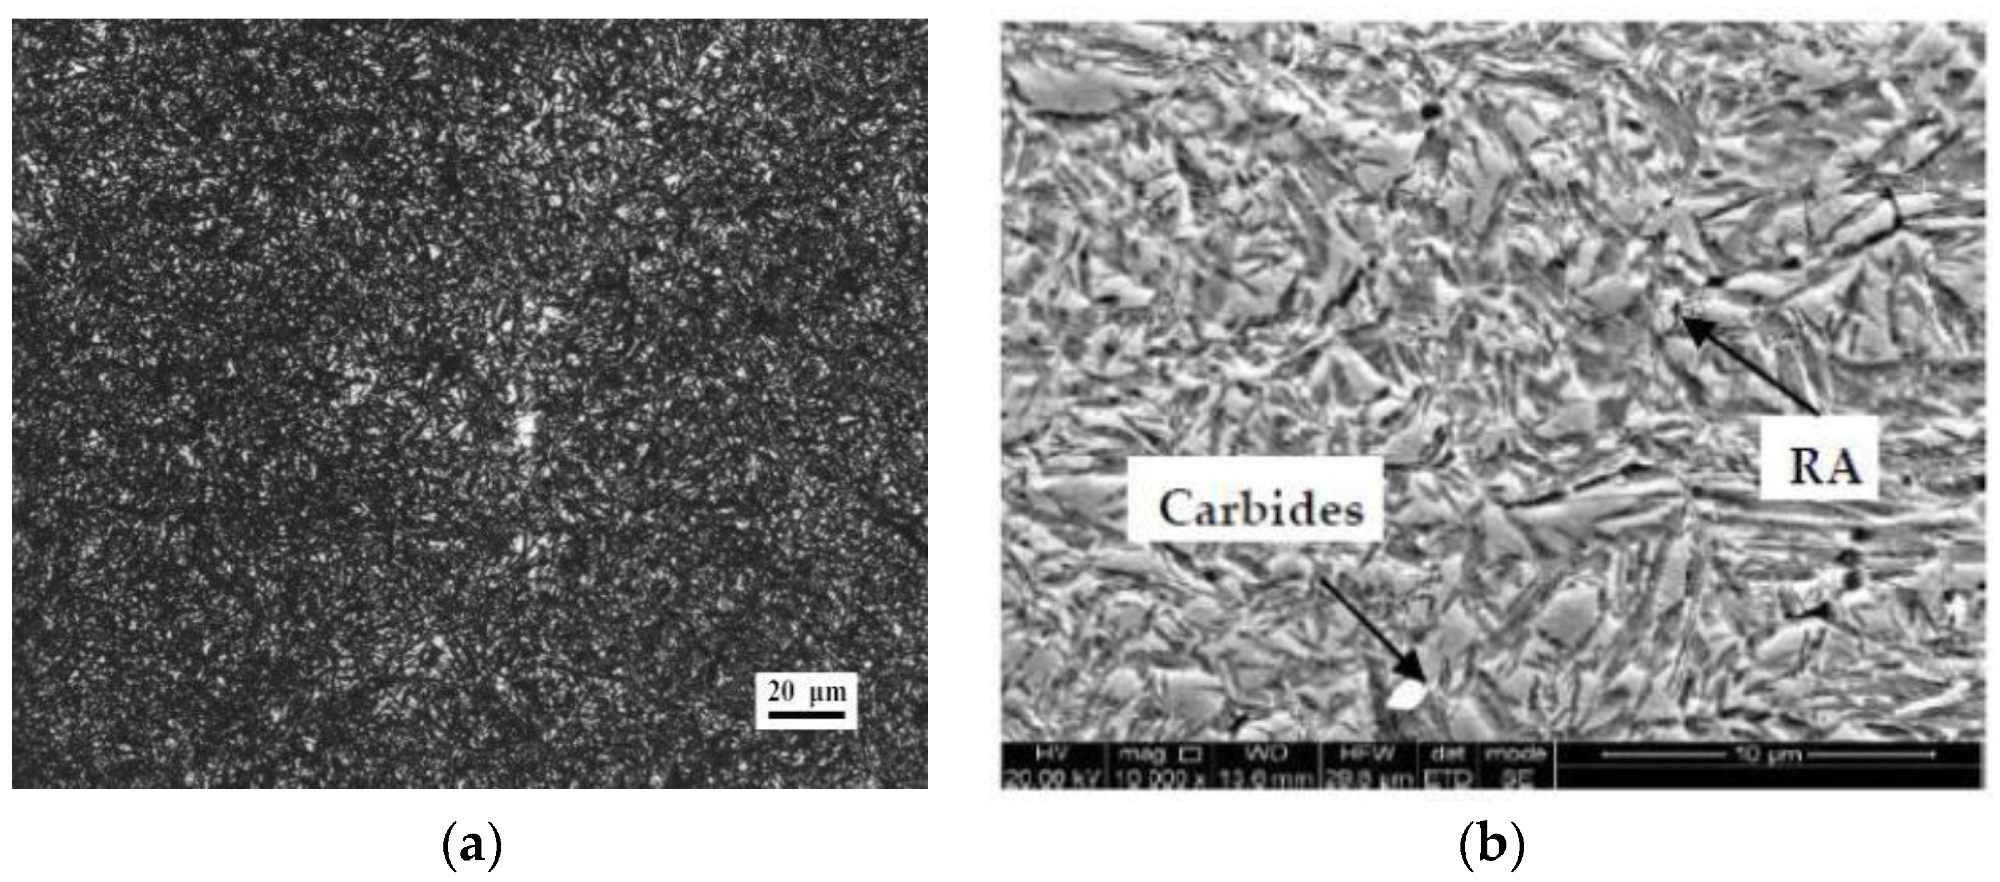 OM and SEM of the carburizing layer: (a) optical microscope microstructure of the carburizing layer and (b) electron microscope microstructure of the carburizing layer.